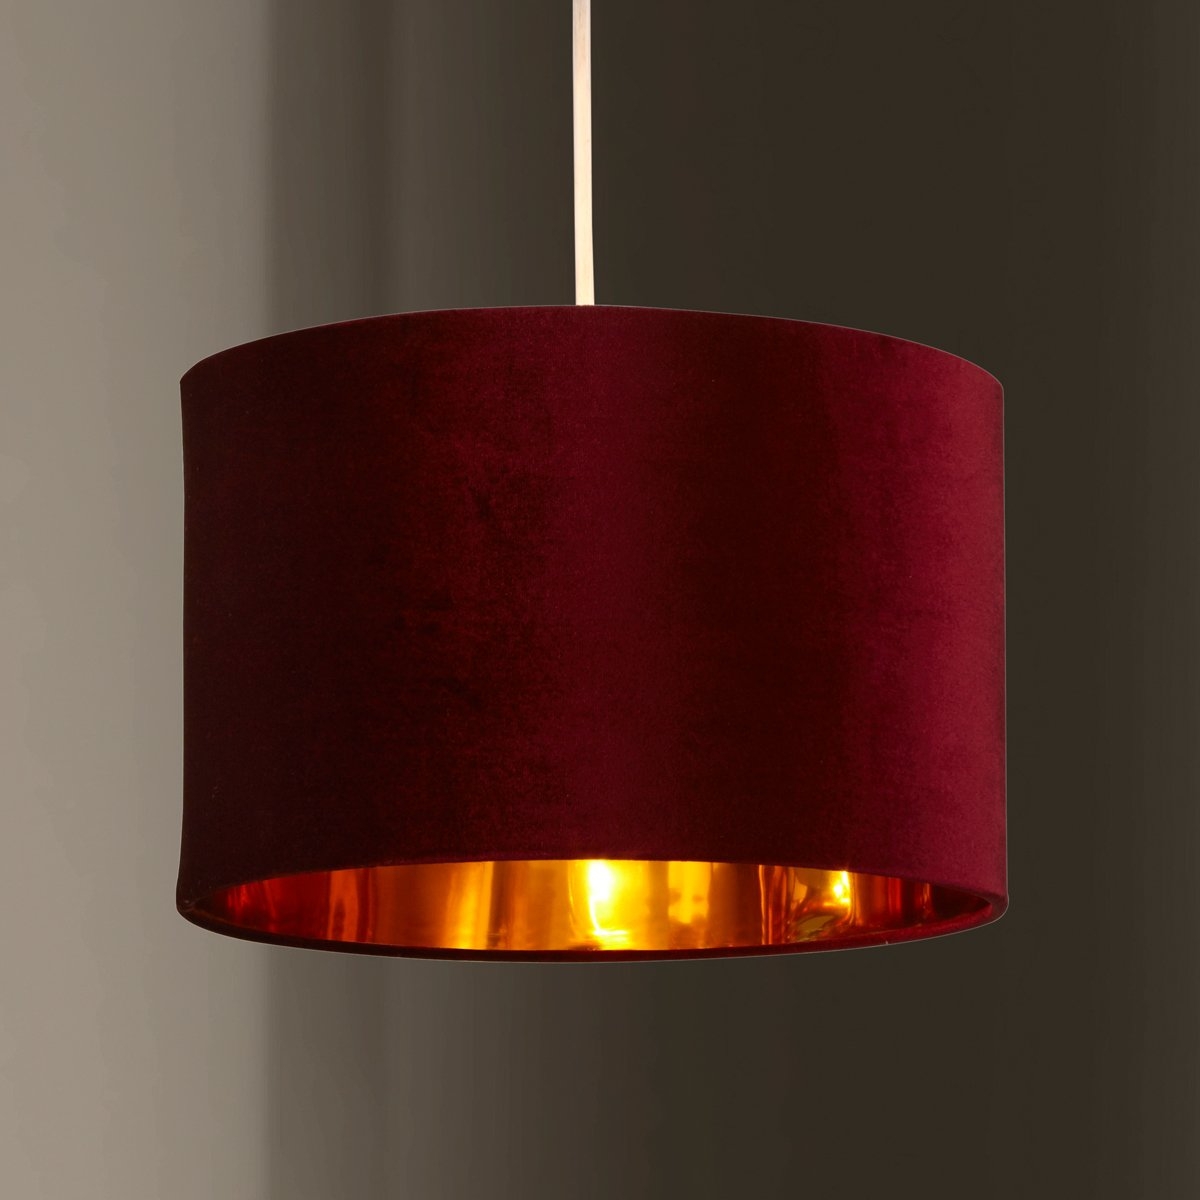 Luxury Pendant Shades – Choice Of Velvet Or Cotton Red Velvet & Gold – Lamp Shade – CGC Retail Outlet